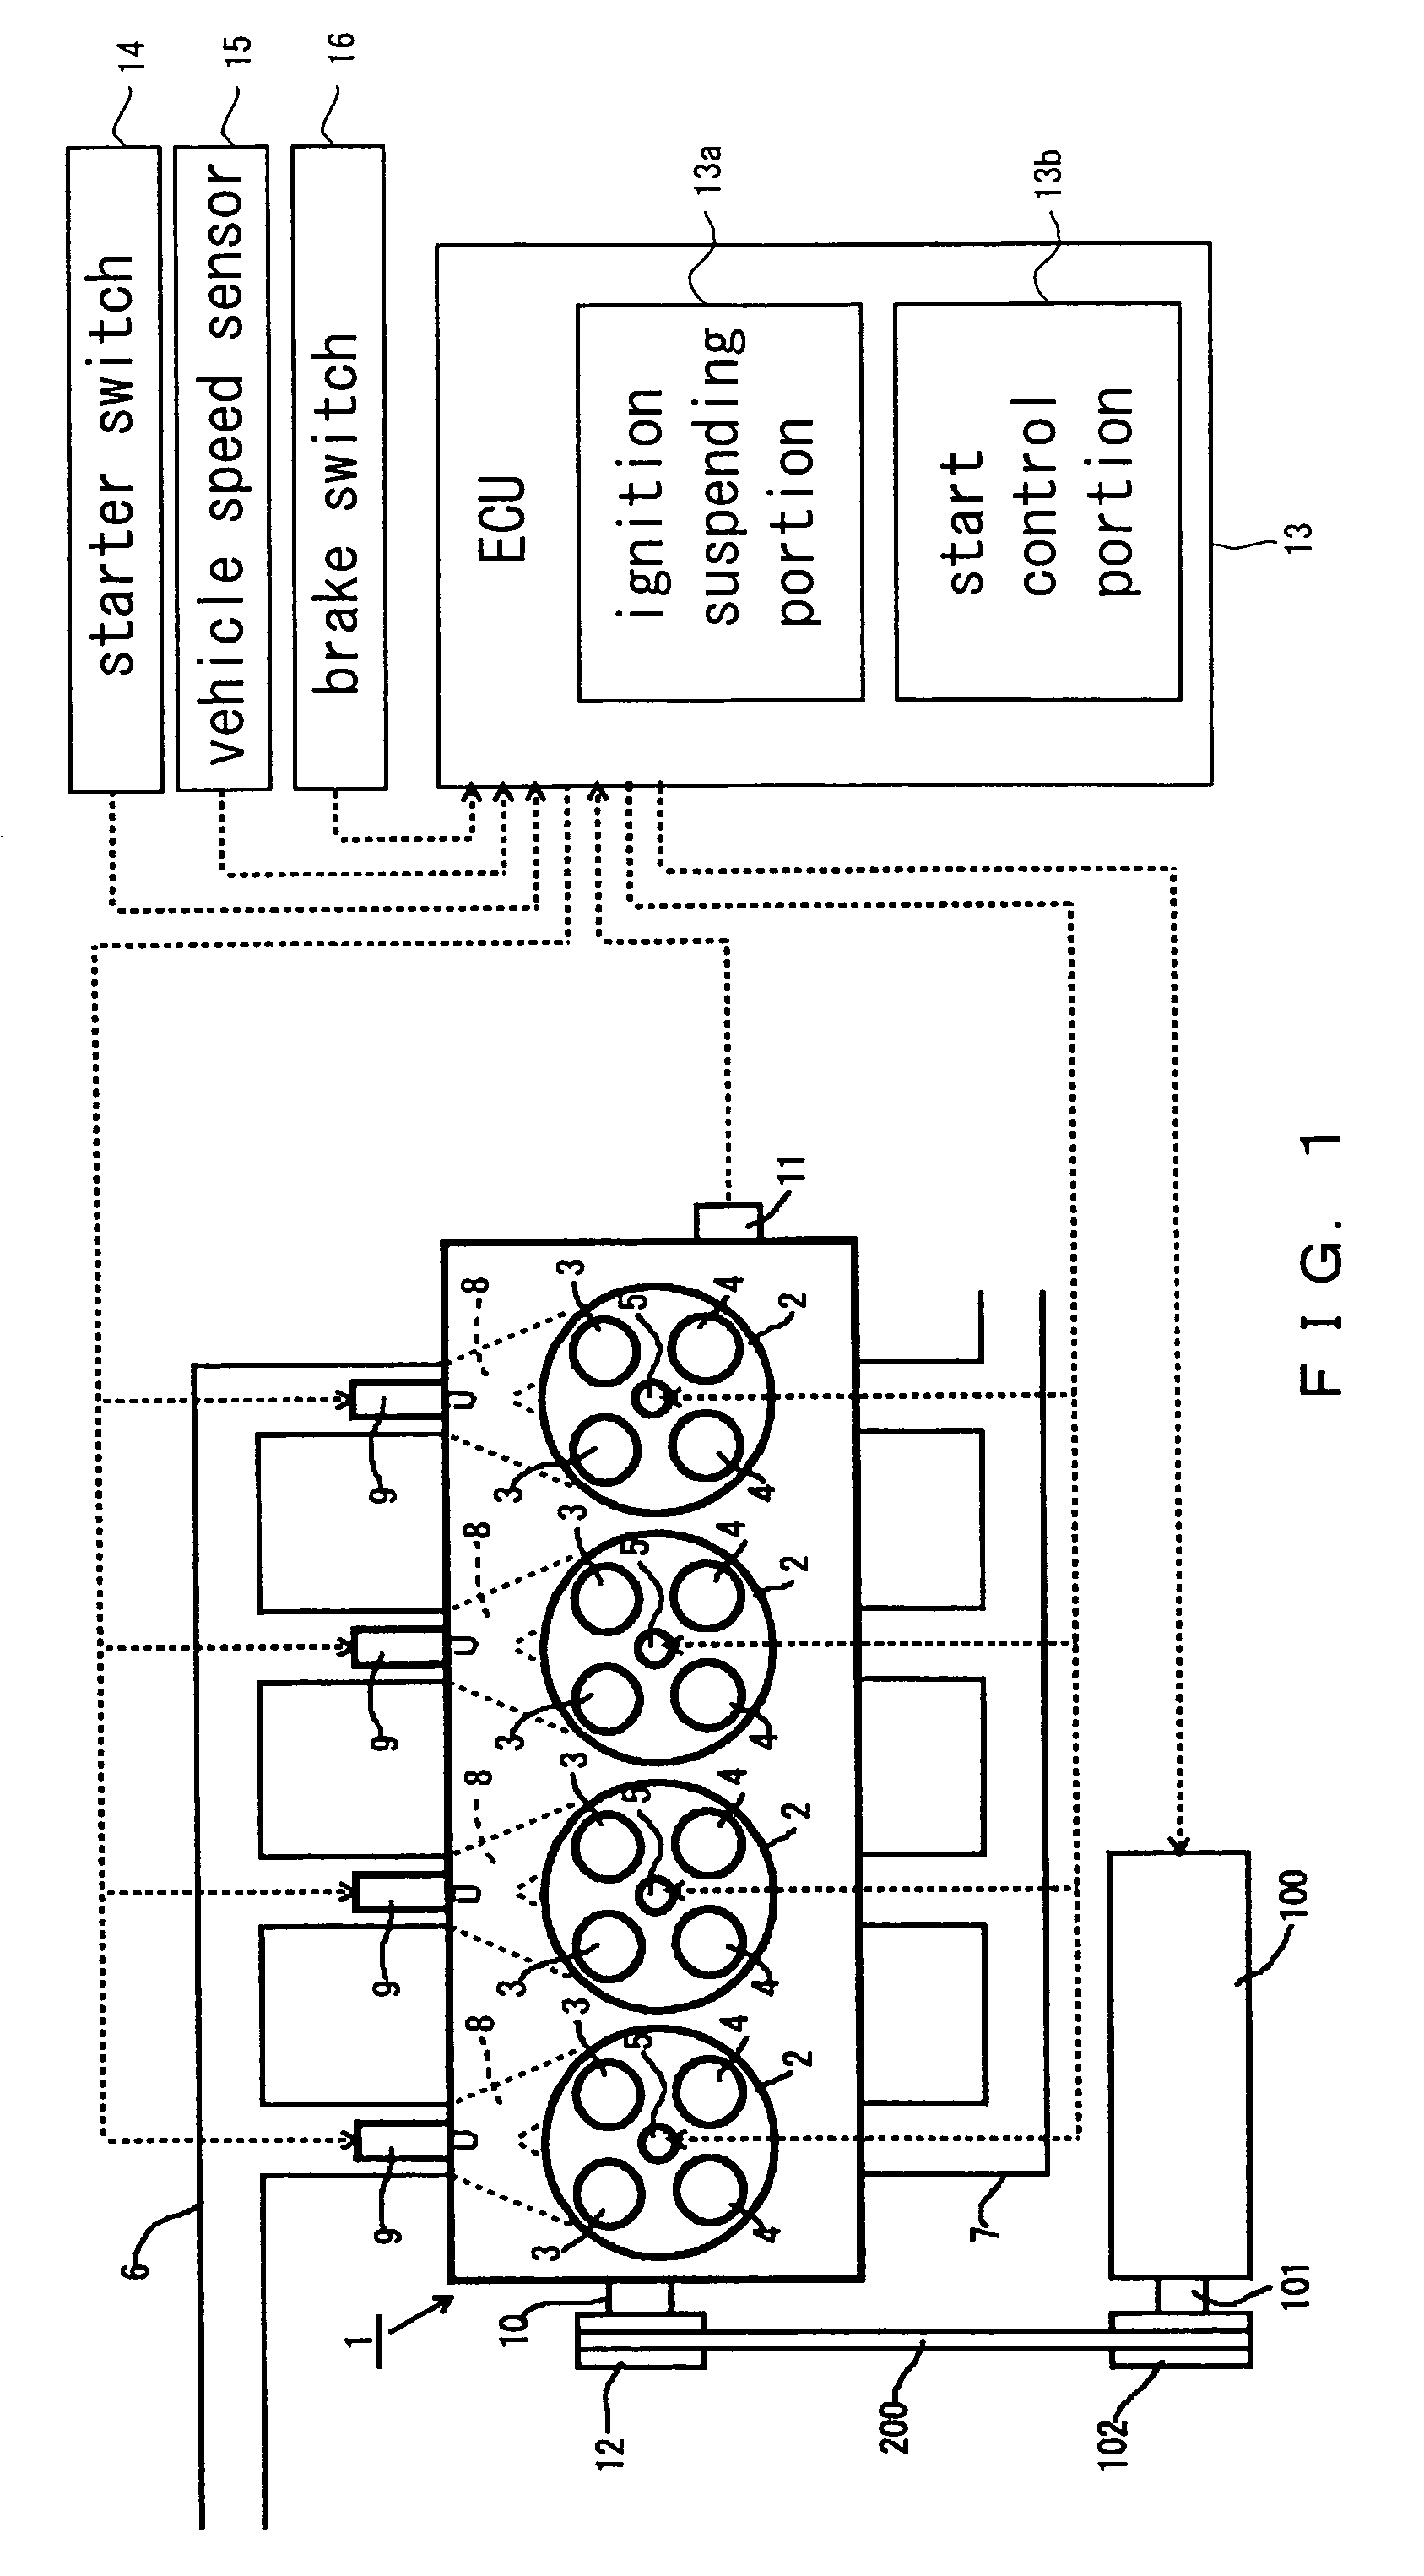 Start control apparatus for internal combustion engine